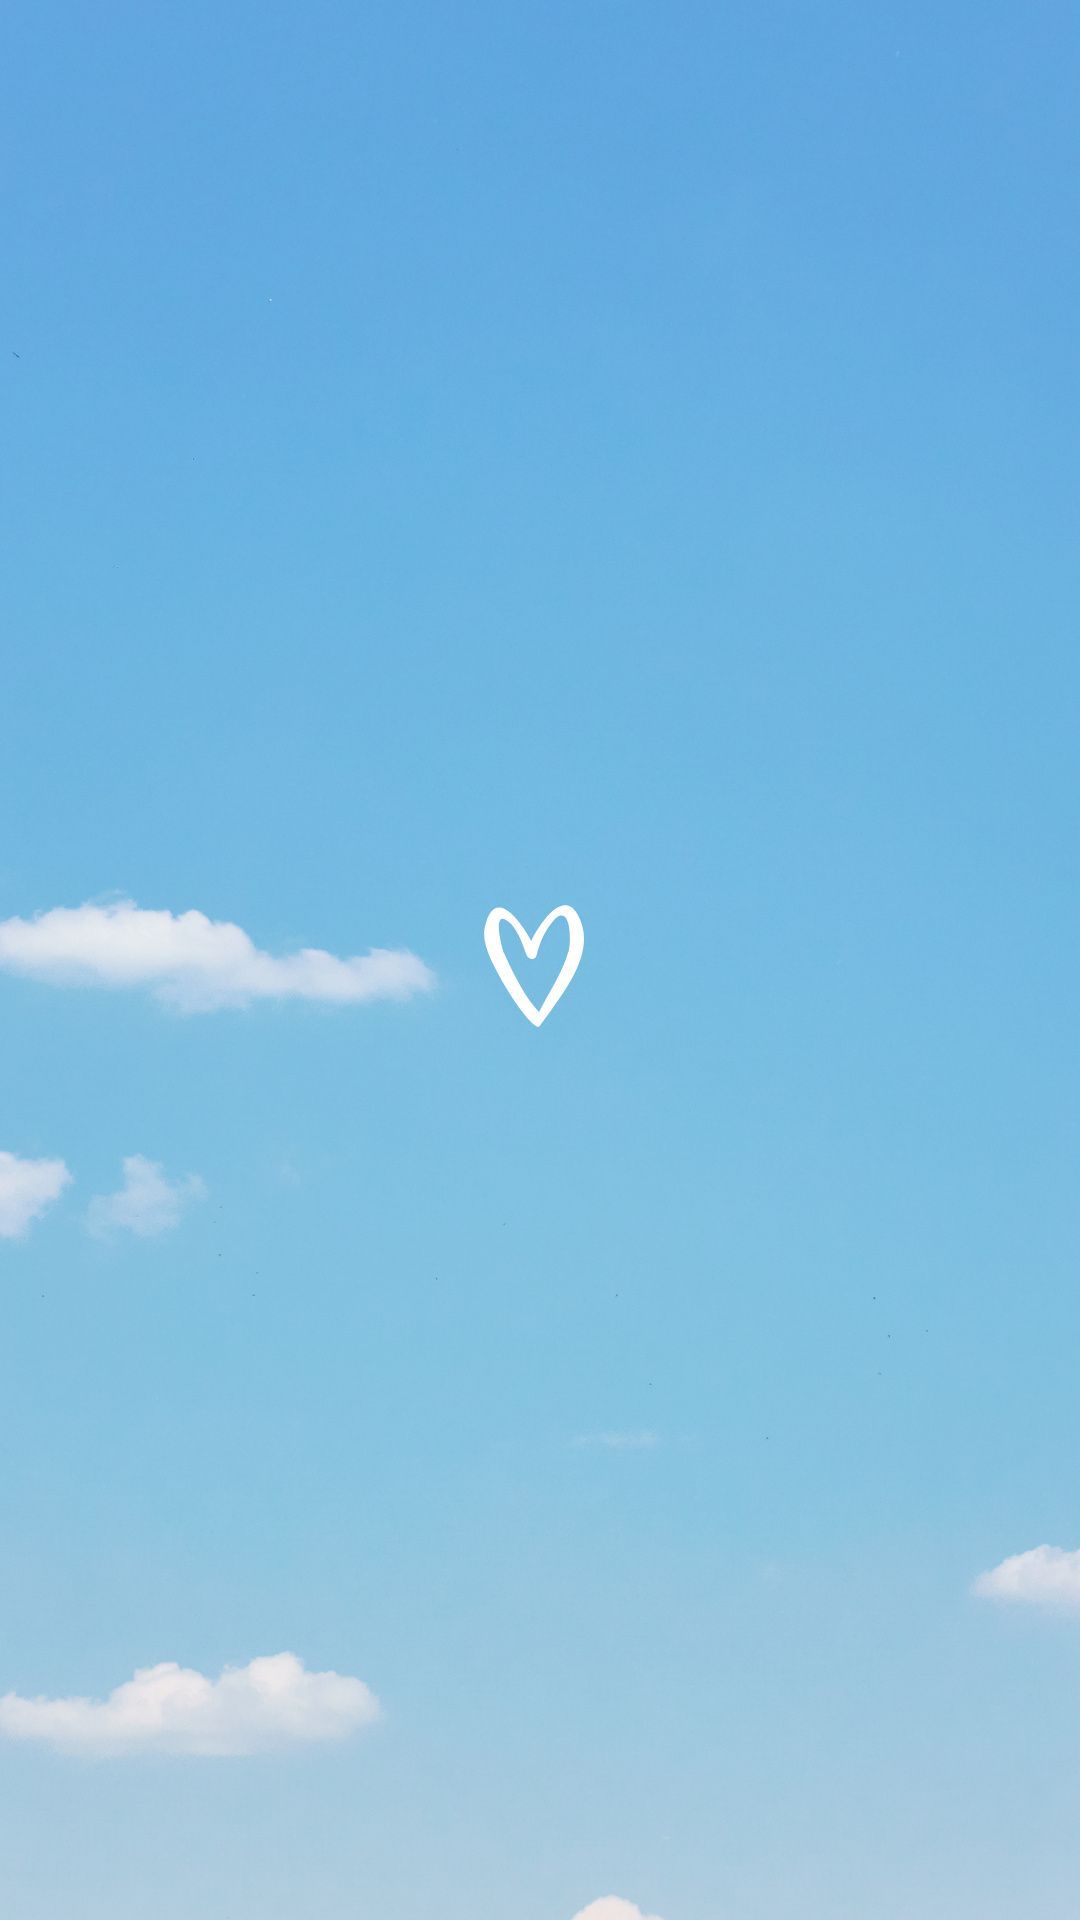 FREE Baby Blue Aesthetic Wallpaper Backgrounds For Your Phone & Social Media Just Jes Lyn